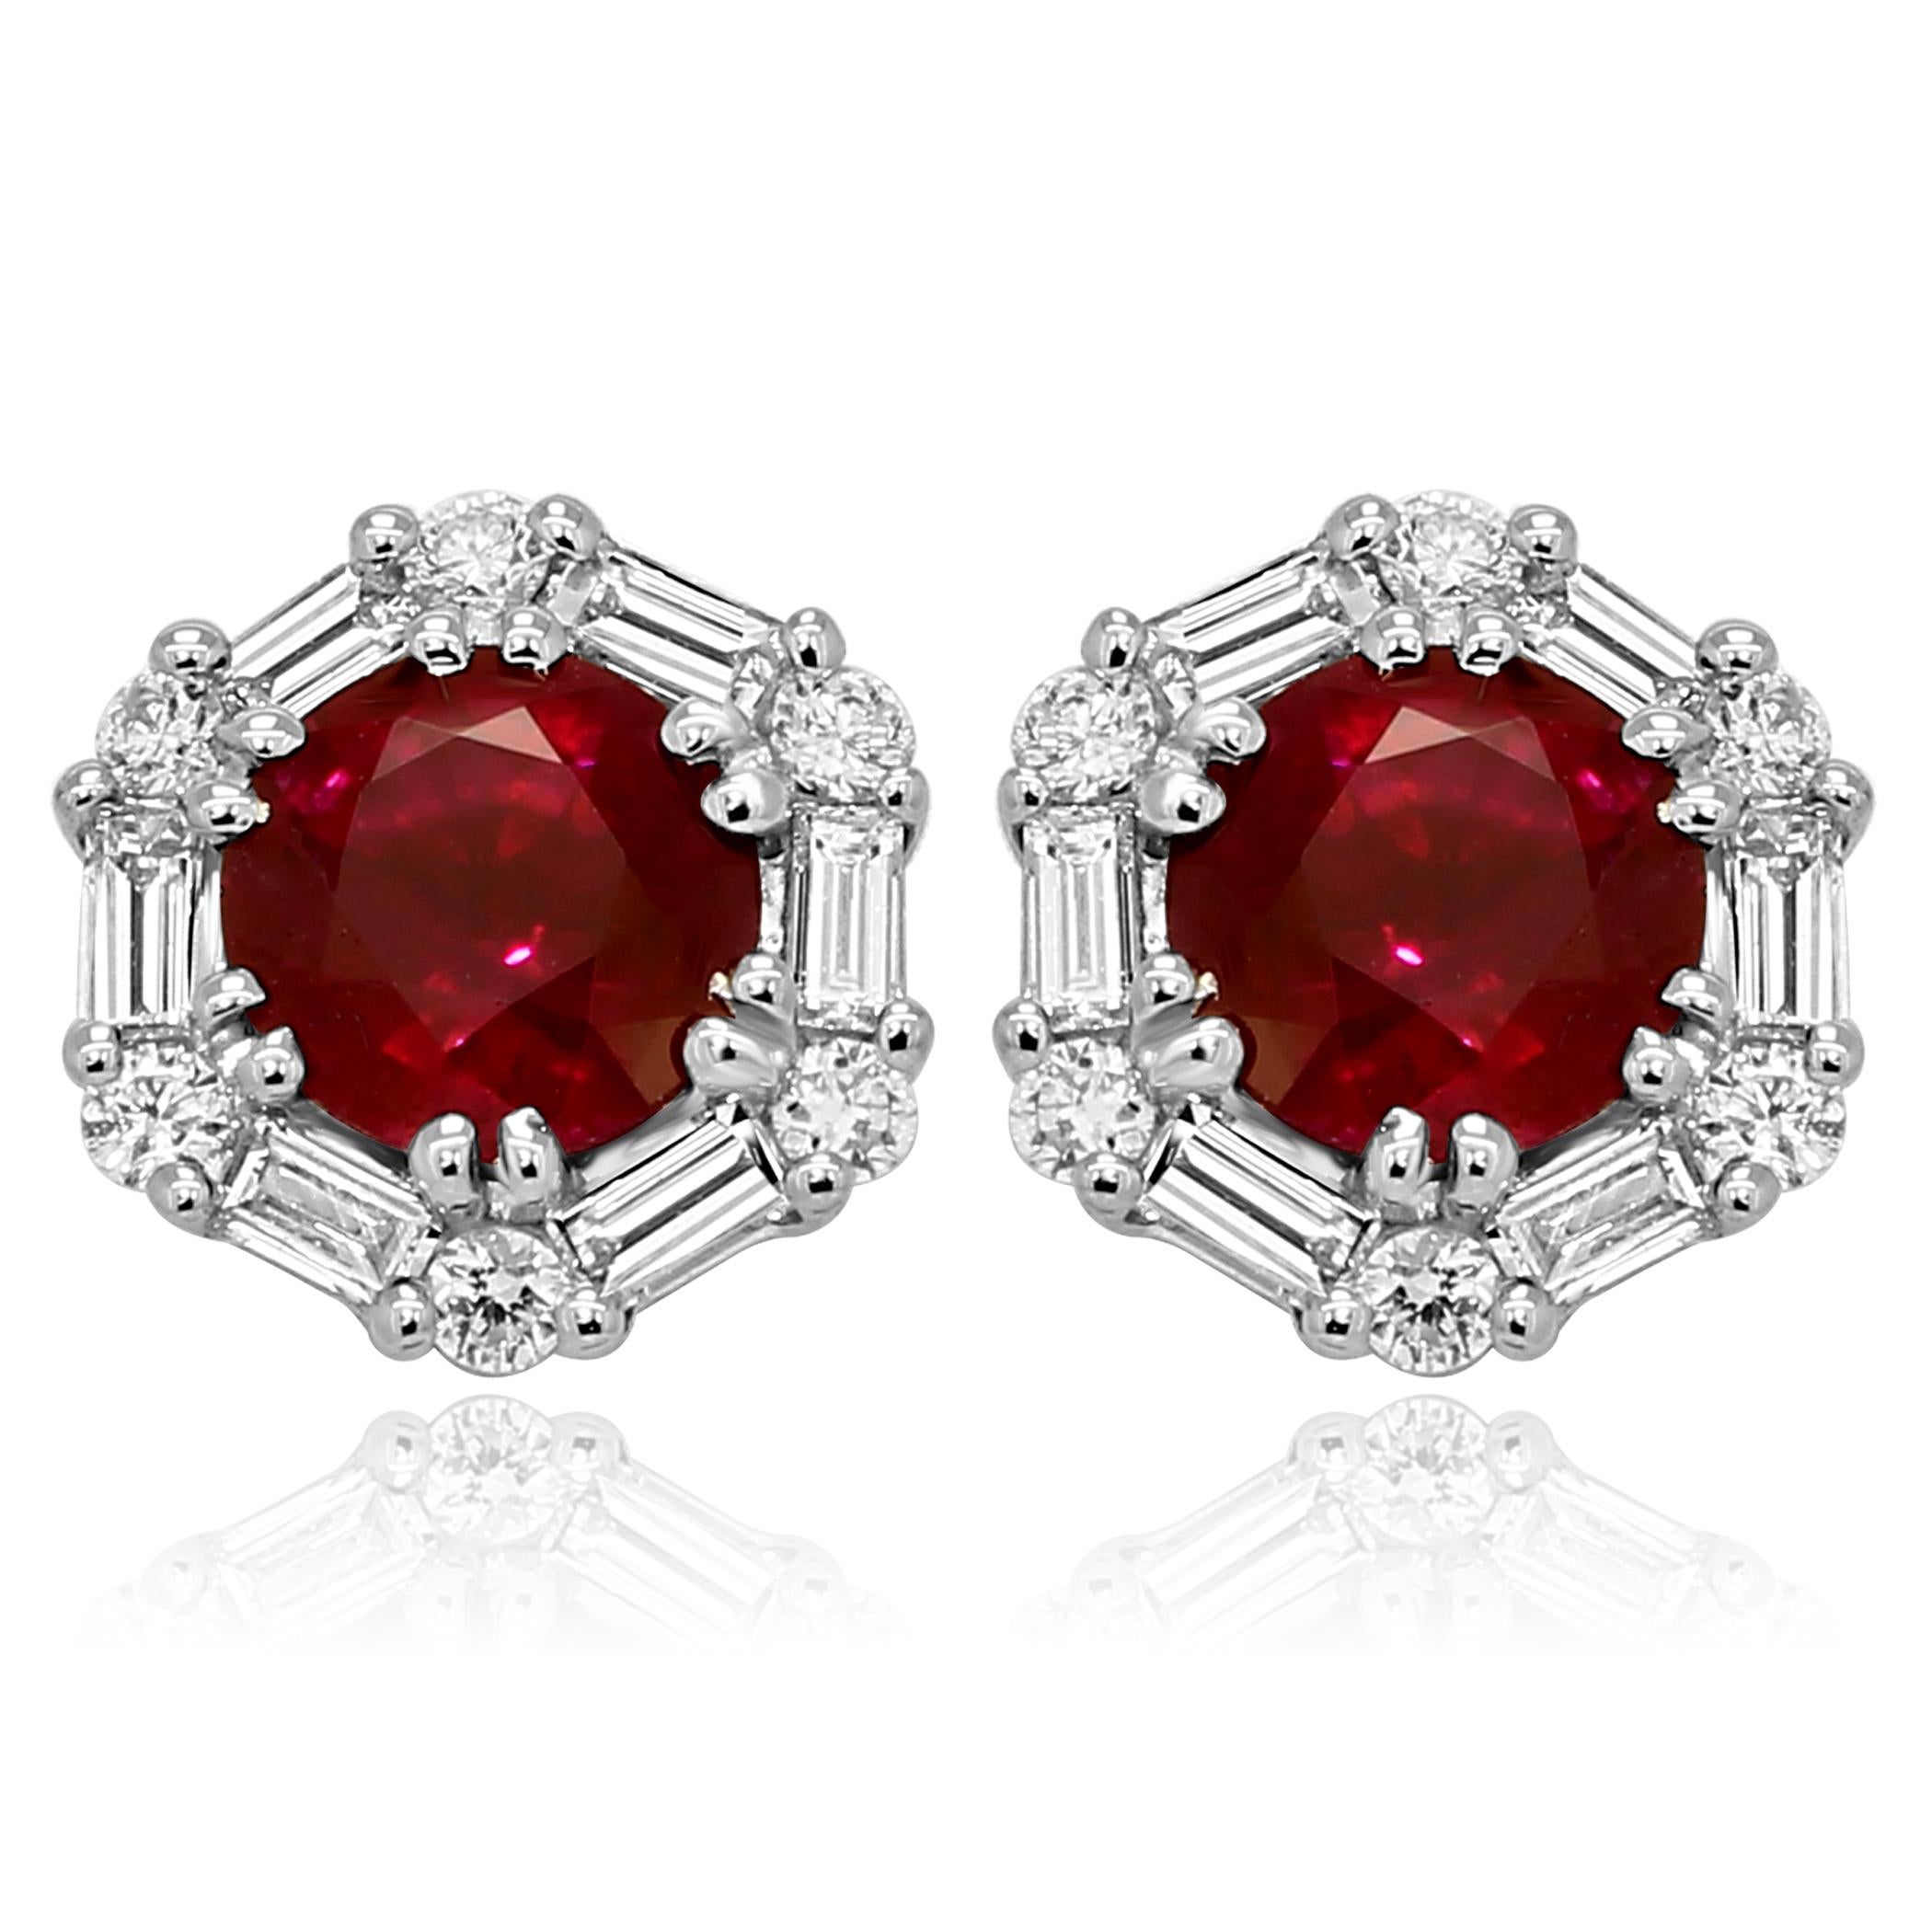 2 Ruby Round 1.27 Carat Encircled in a Halo White Diamond Round 0.13 Carat and White  Diamond Baguettes 0.25 Carat in 14K White Gold Gorgeous Earring.

2 Center Ruby Weight 1.14 Carat
Total Weight 1.52 Carat

Matching Necklace Ref # LU63736638241